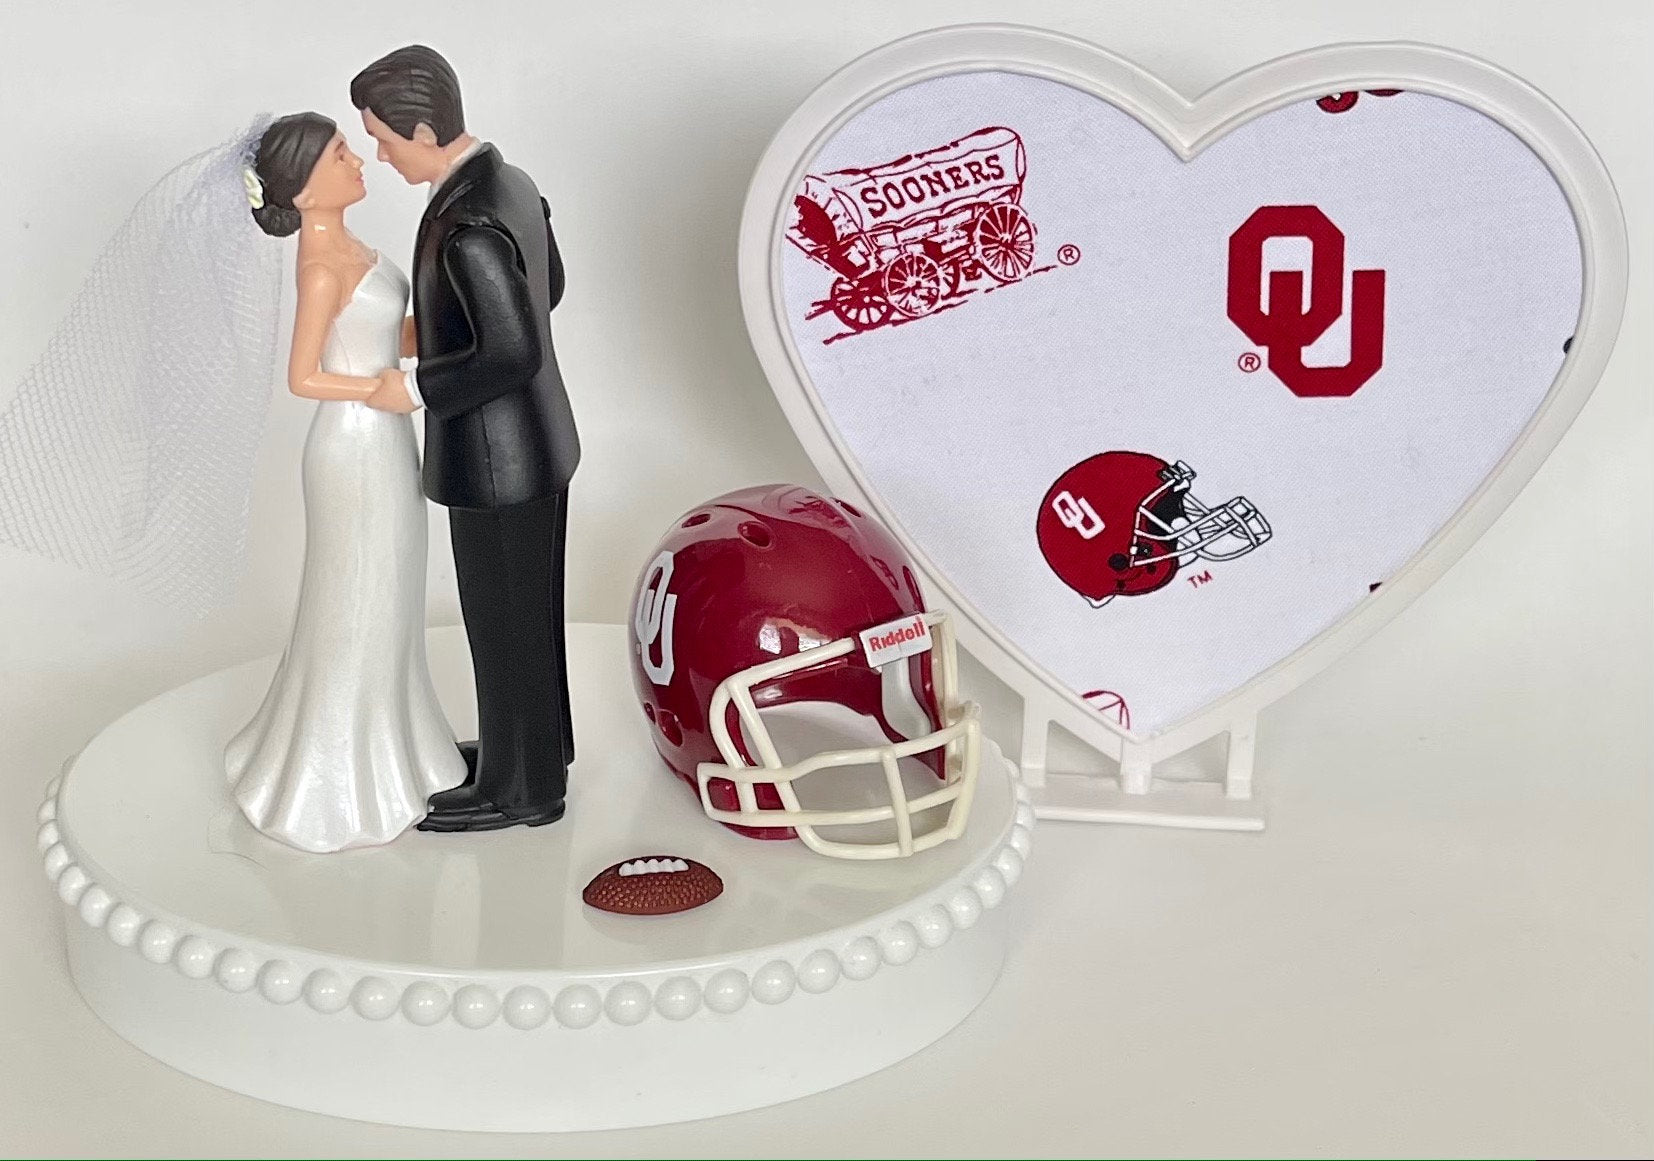 Wedding Cake Topper Oklahoma Sooners Football Themed Beautiful Short-Haired Bride and Groom One-of-a-Kind Sports Fan Cake Top Shower Gift